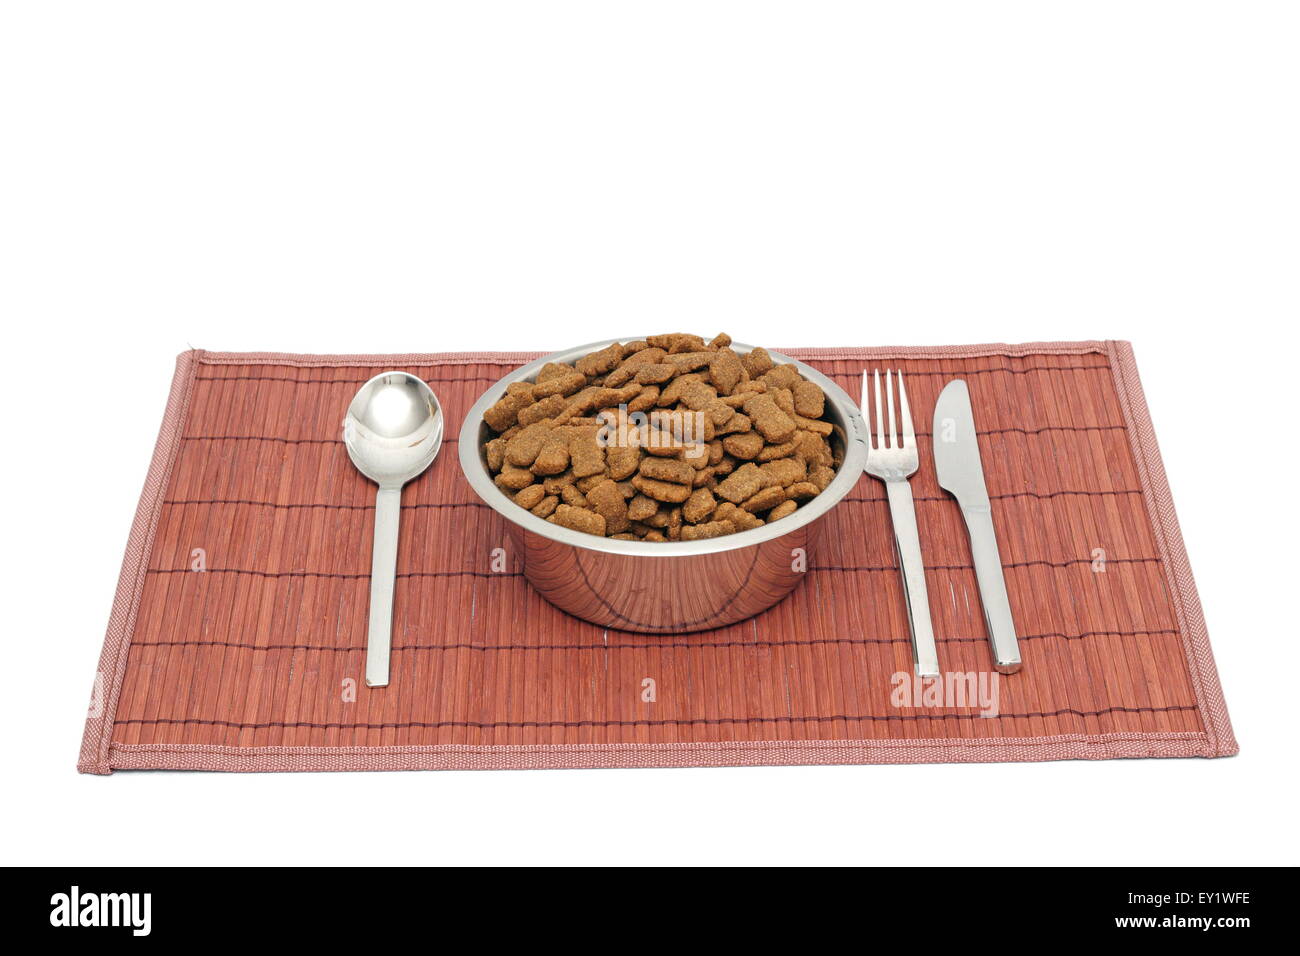 concept of pet meal served on a metal bowl Stock Photo